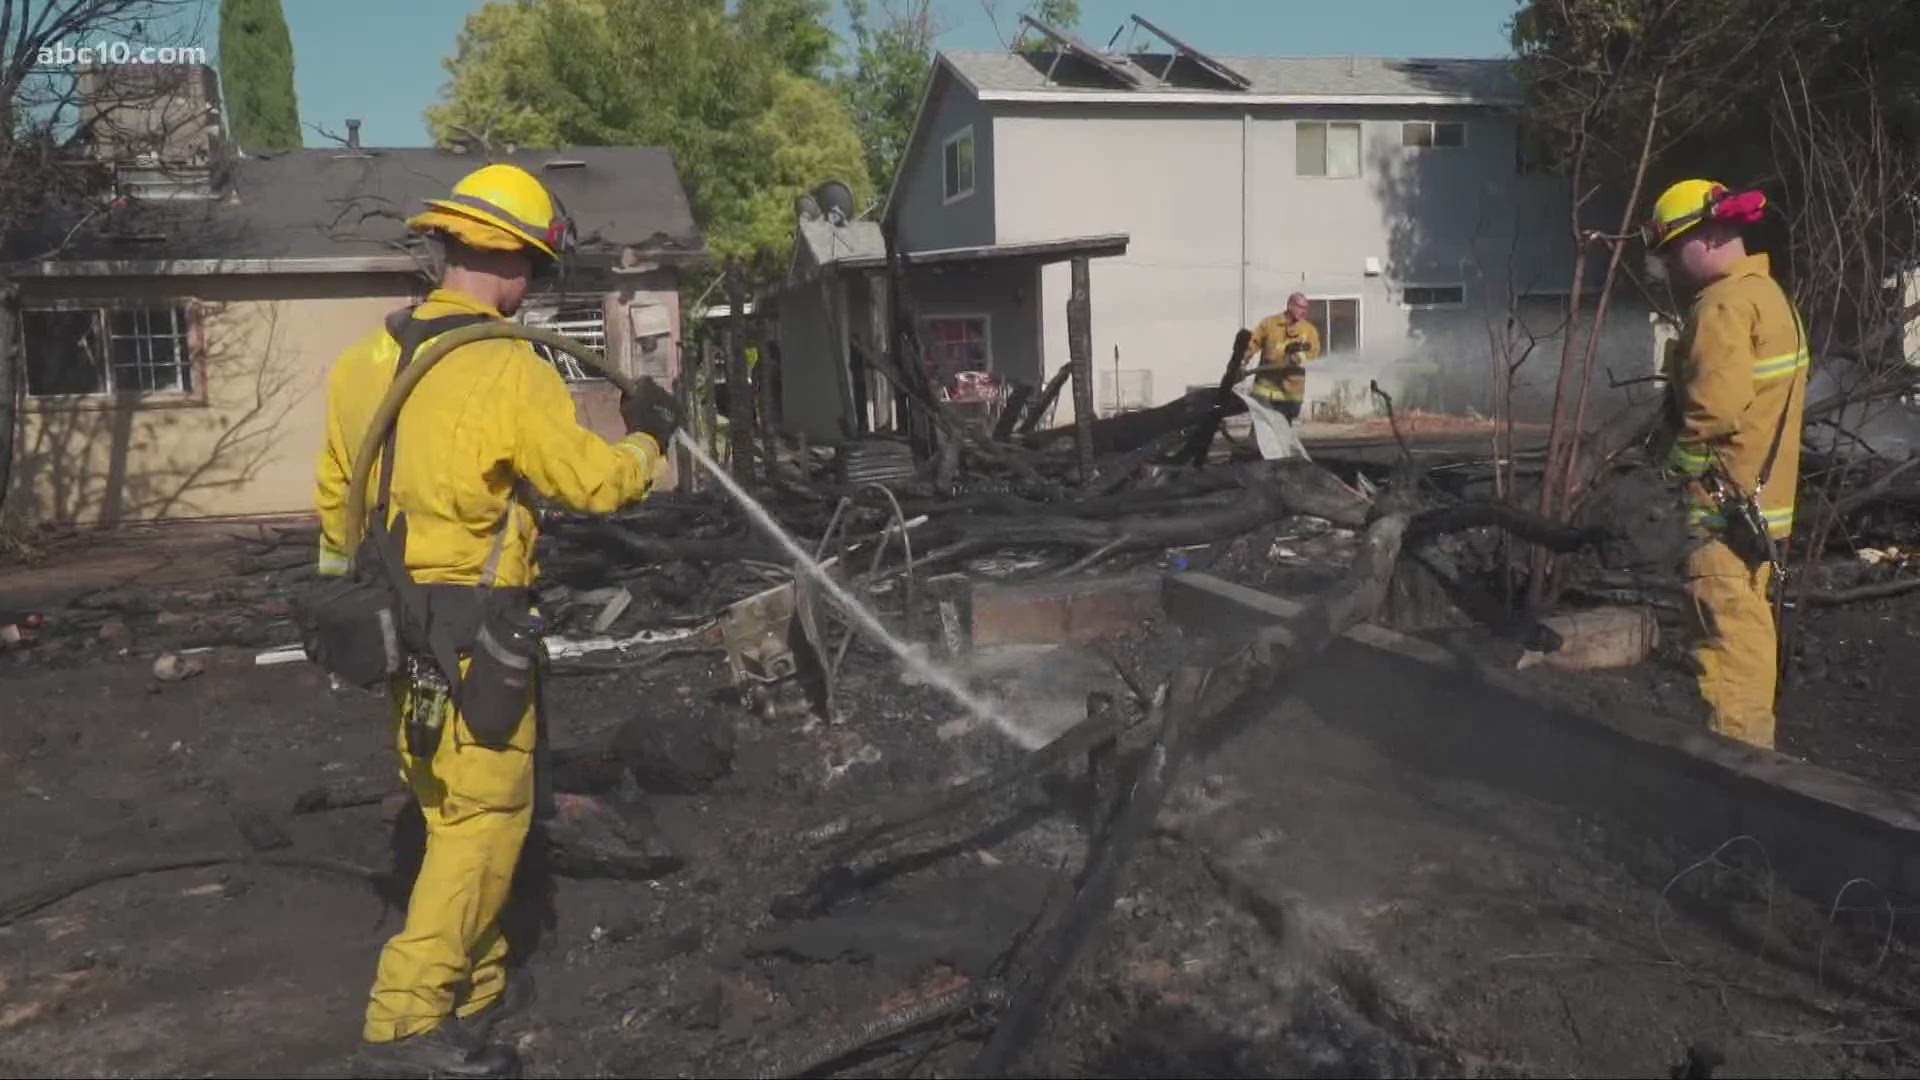 The small grass fire that damaged at least one home in Natomas was sparked by a firework, fire officials said.